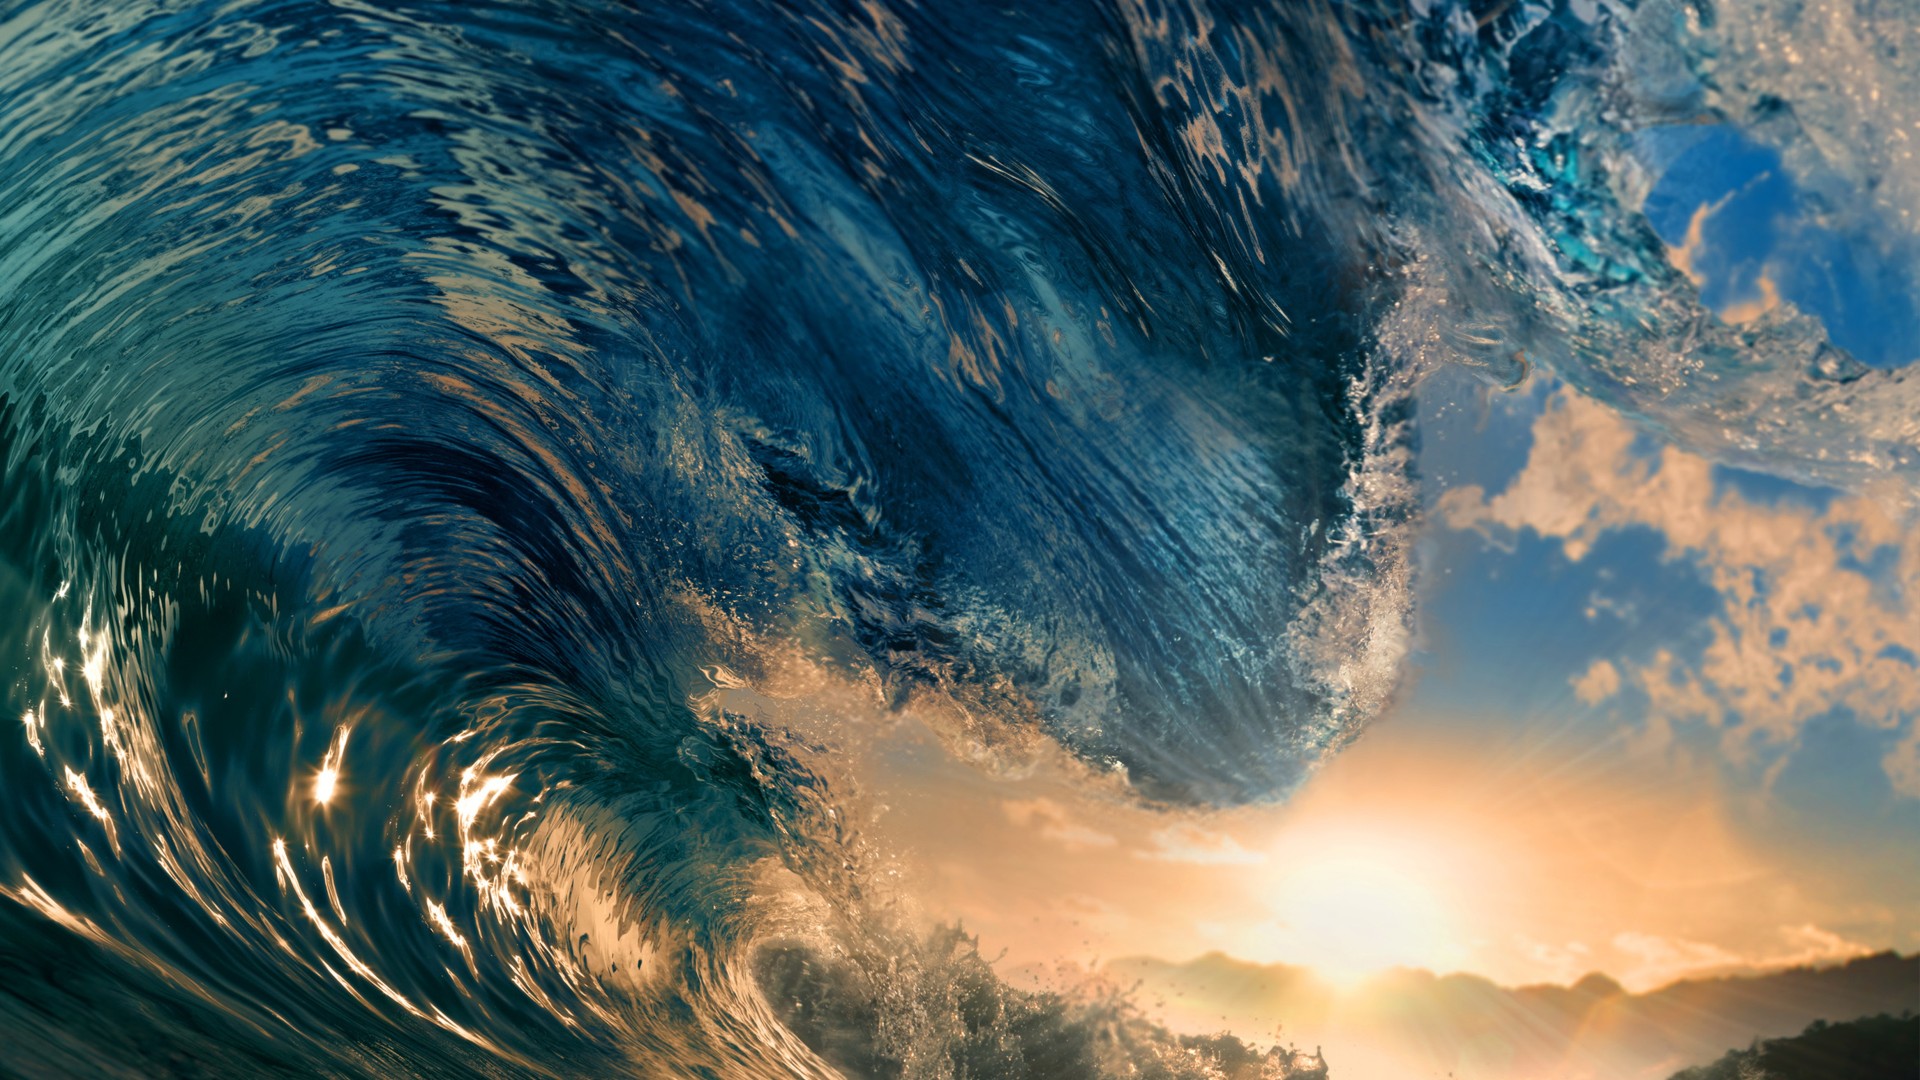 Ocean Wave Wallpaper for iPhone Mobile Background Images Pictures -  FancyOdds